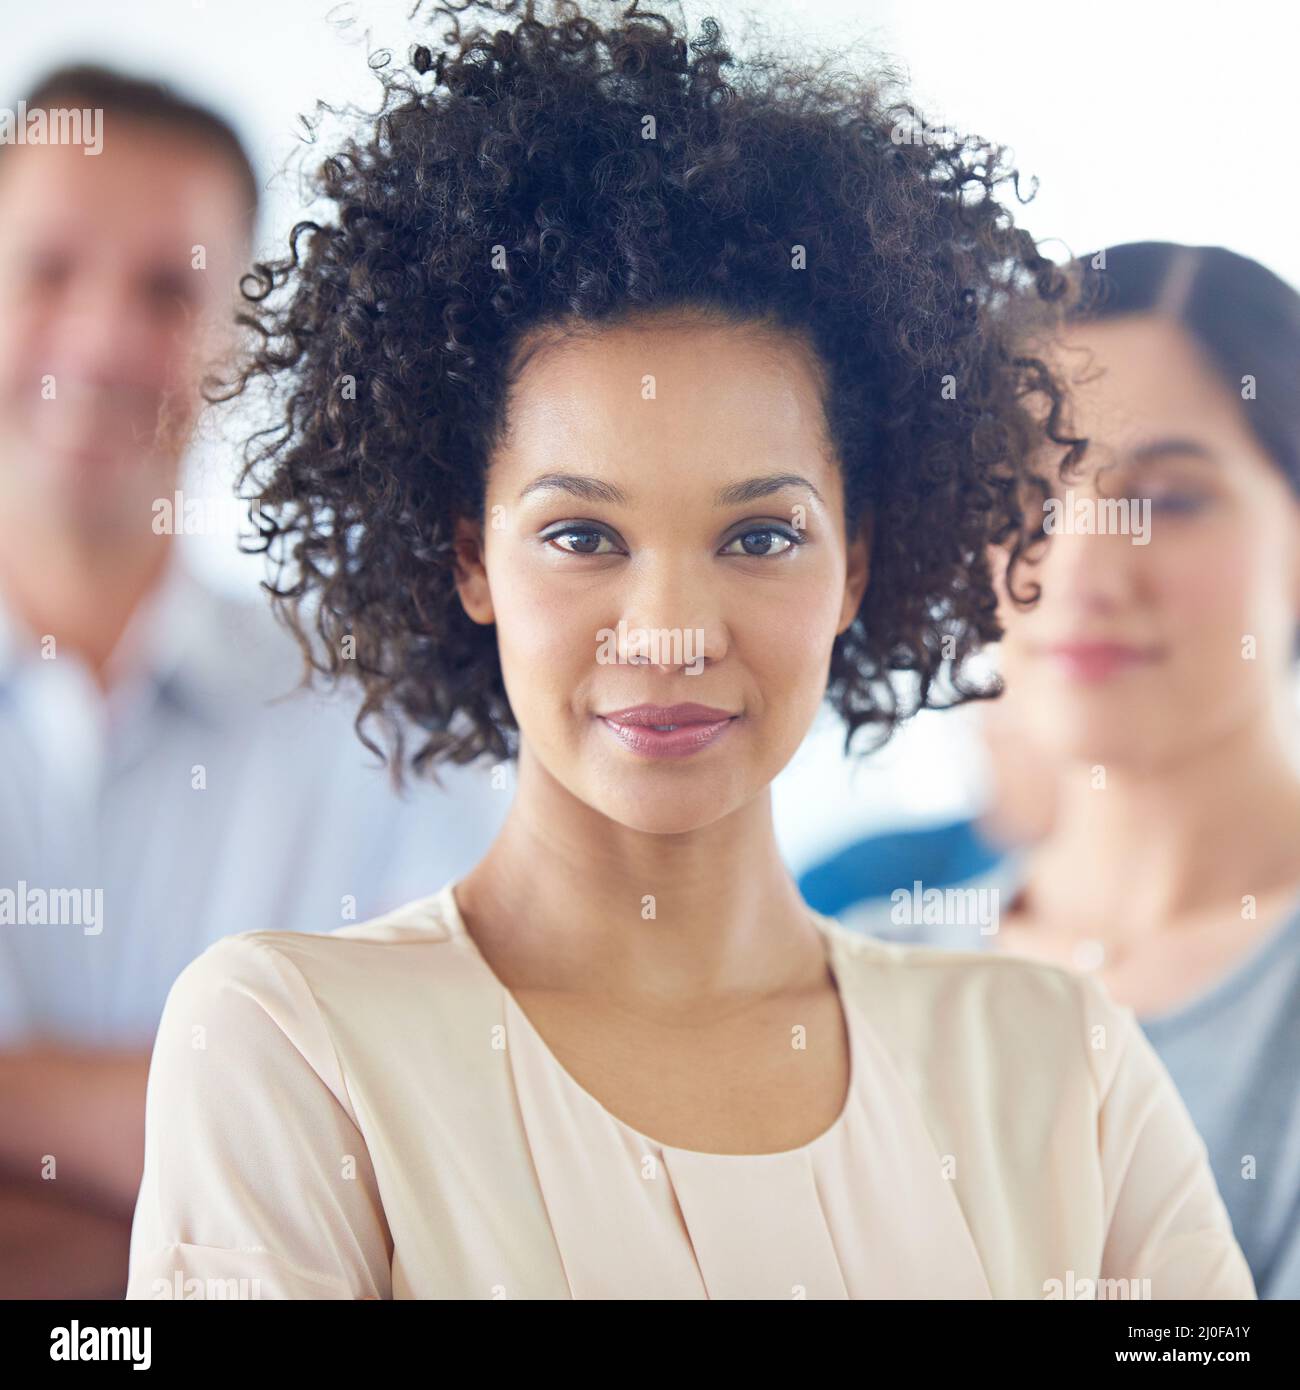 Shes a confident leader. Portrait of a beautiful woman with her colleagues in the background. Stock Photo